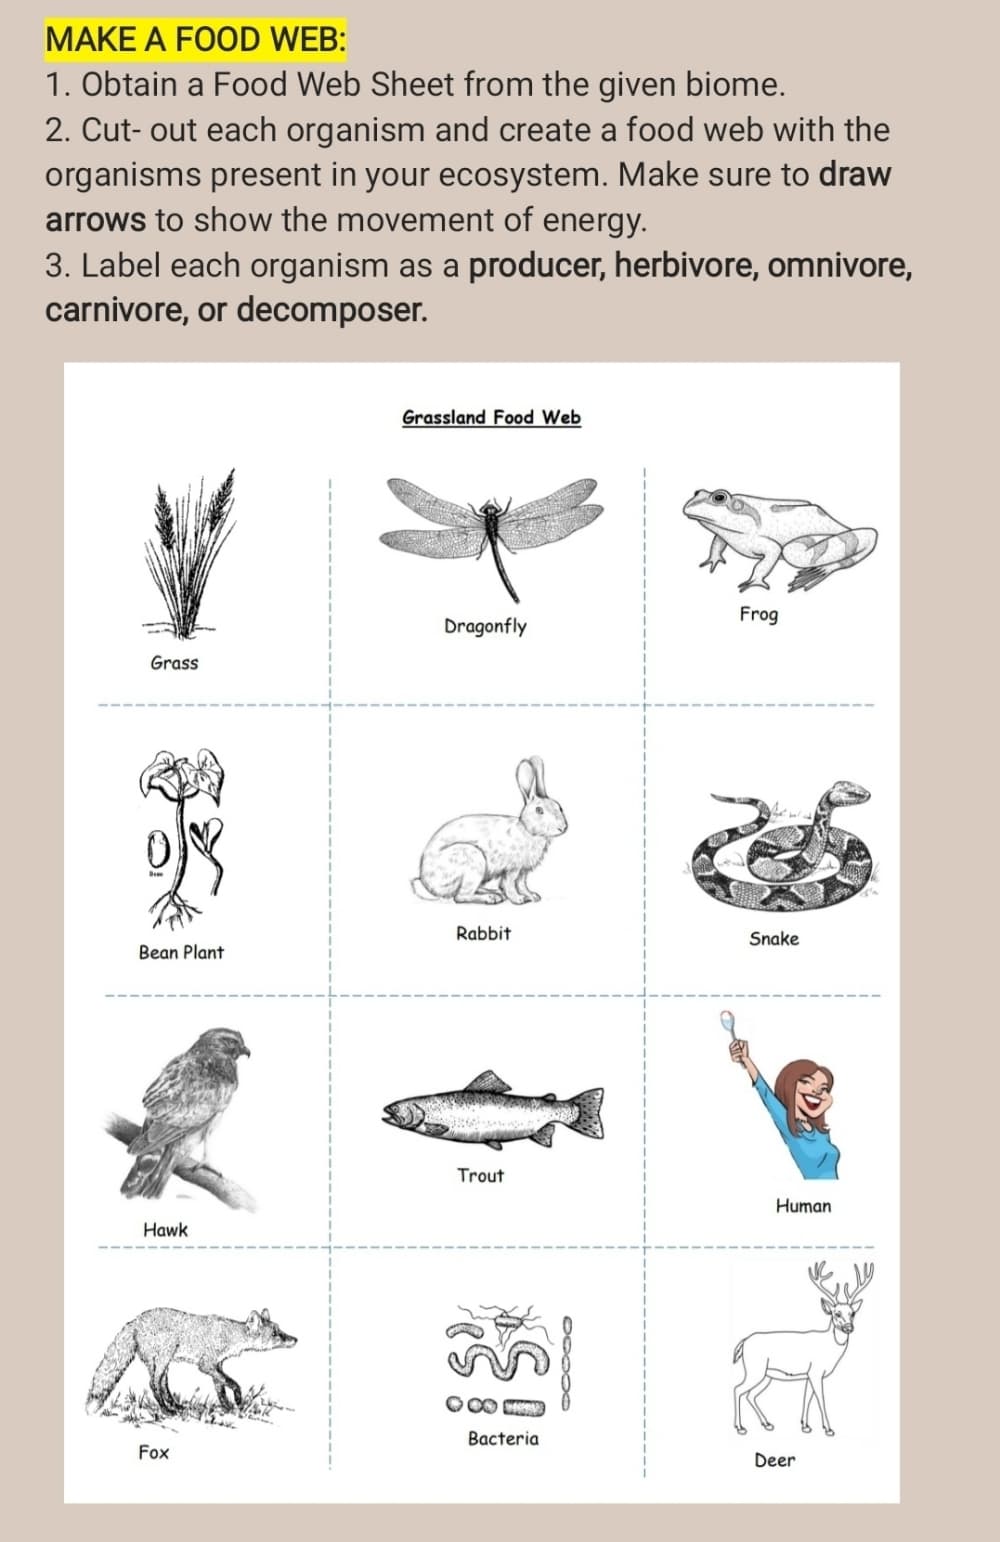 MAKE A FOOD WEB:
1. Obtain a Food Web Sheet from the given biome.
2. Cut-out each organism and create a food web with the
organisms present in your ecosystem. Make sure to draw
arrows to show the movement of energy.
3. Label each organism as a producer, herbivore, omnivore,
carnivore, or decomposer.
Grass
A
Bean Plant
Hawk
Fox
Grassland Food Web
Dragonfly
Rabbit
Trout
08
Bacteria
0000
Frog
Snake
Human
Deer